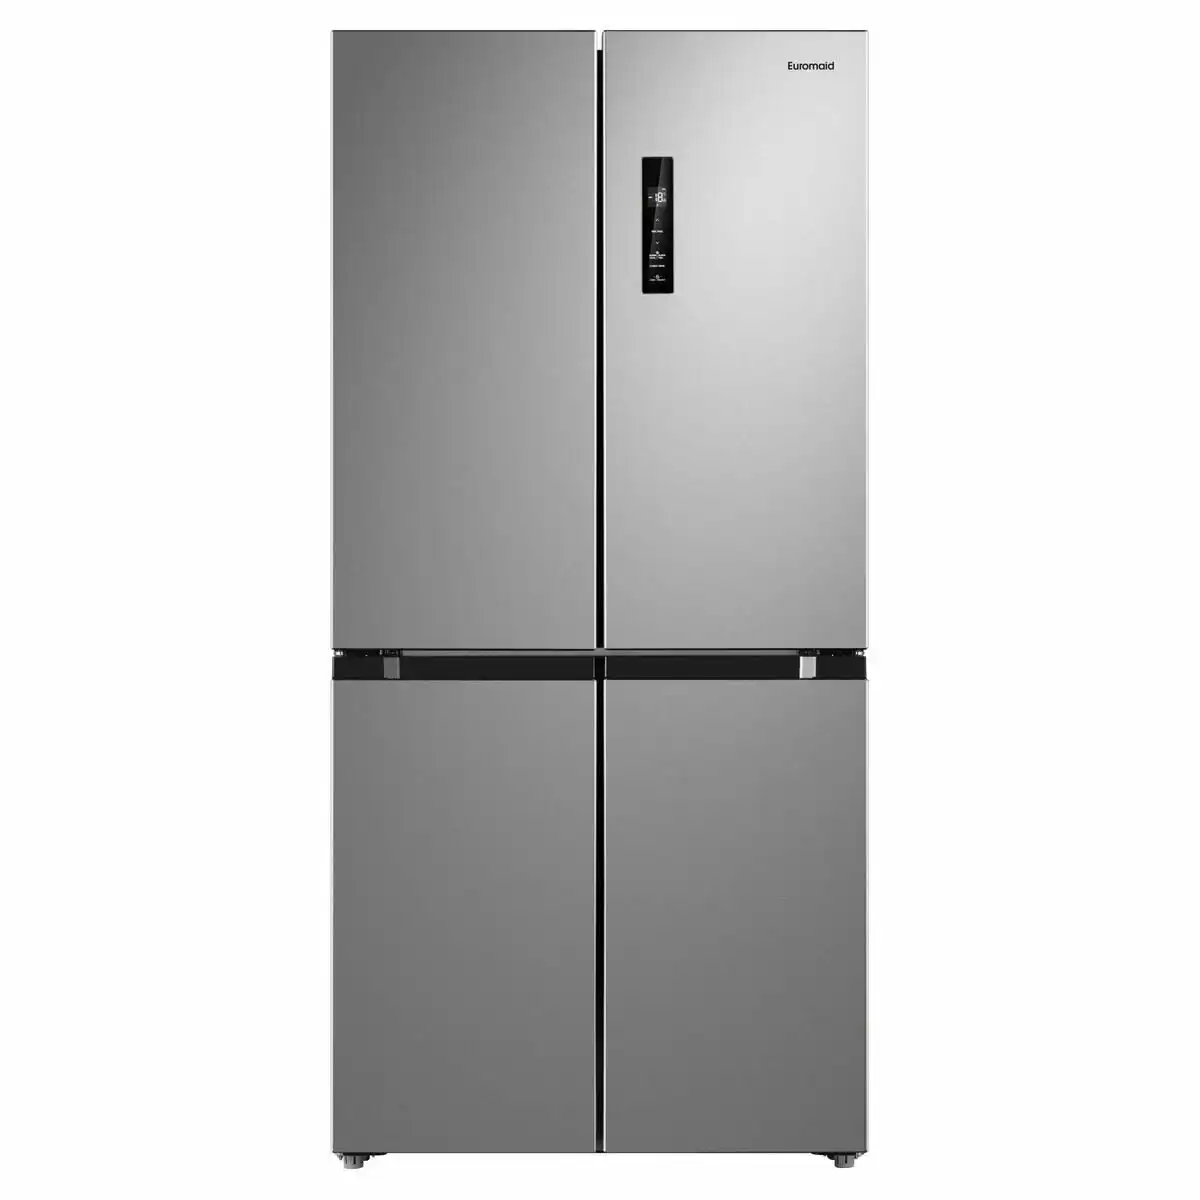 Euromaid 474L French Door Frost Free Fridge